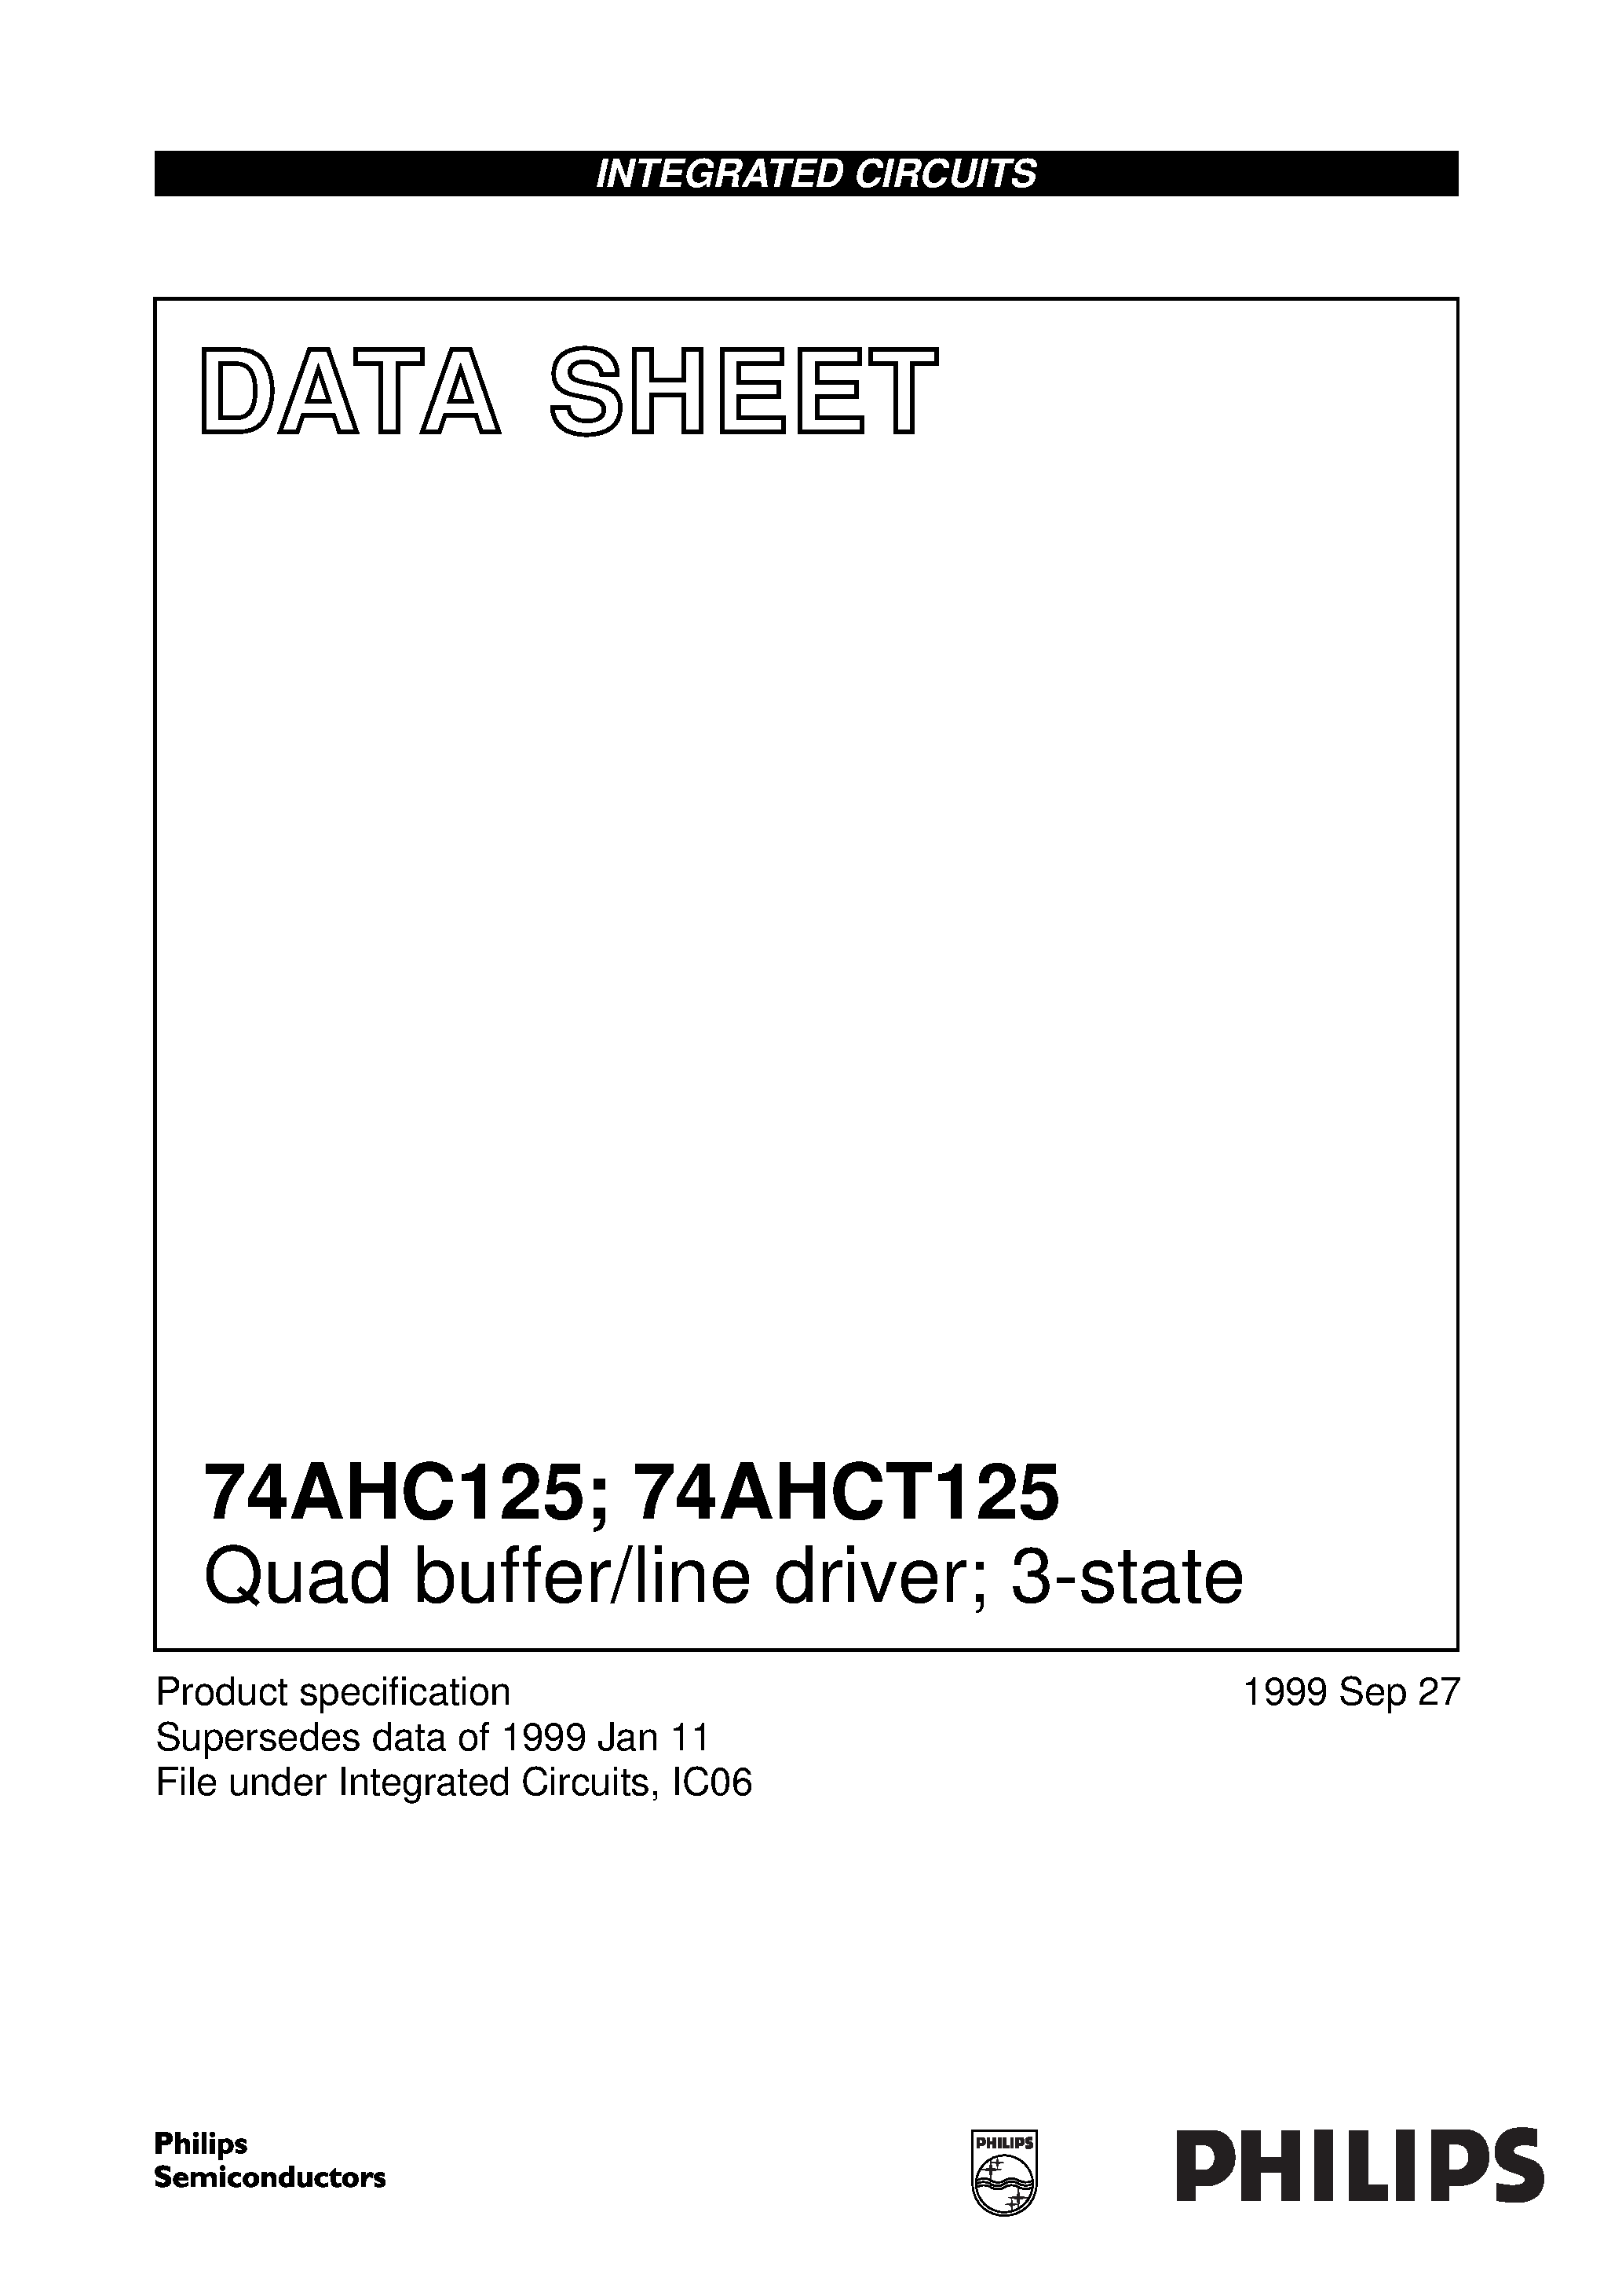 Datasheet 74AHC125 - Quad buffer/line driver; 3-state page 1